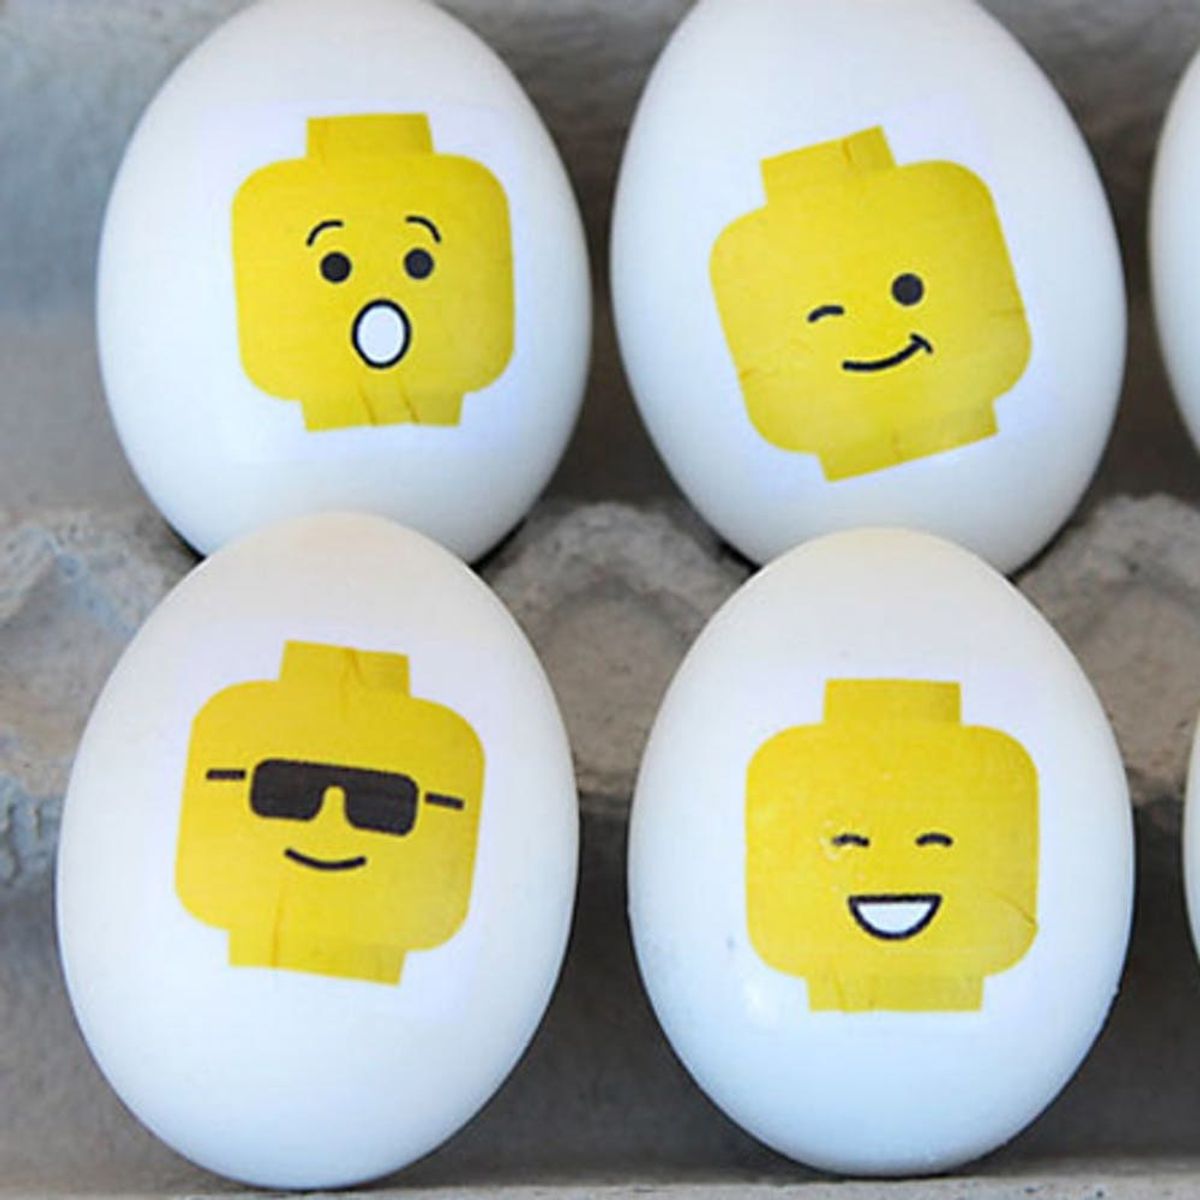 Geek Out With 22 Pop Culture-Inspired Easter Eggs